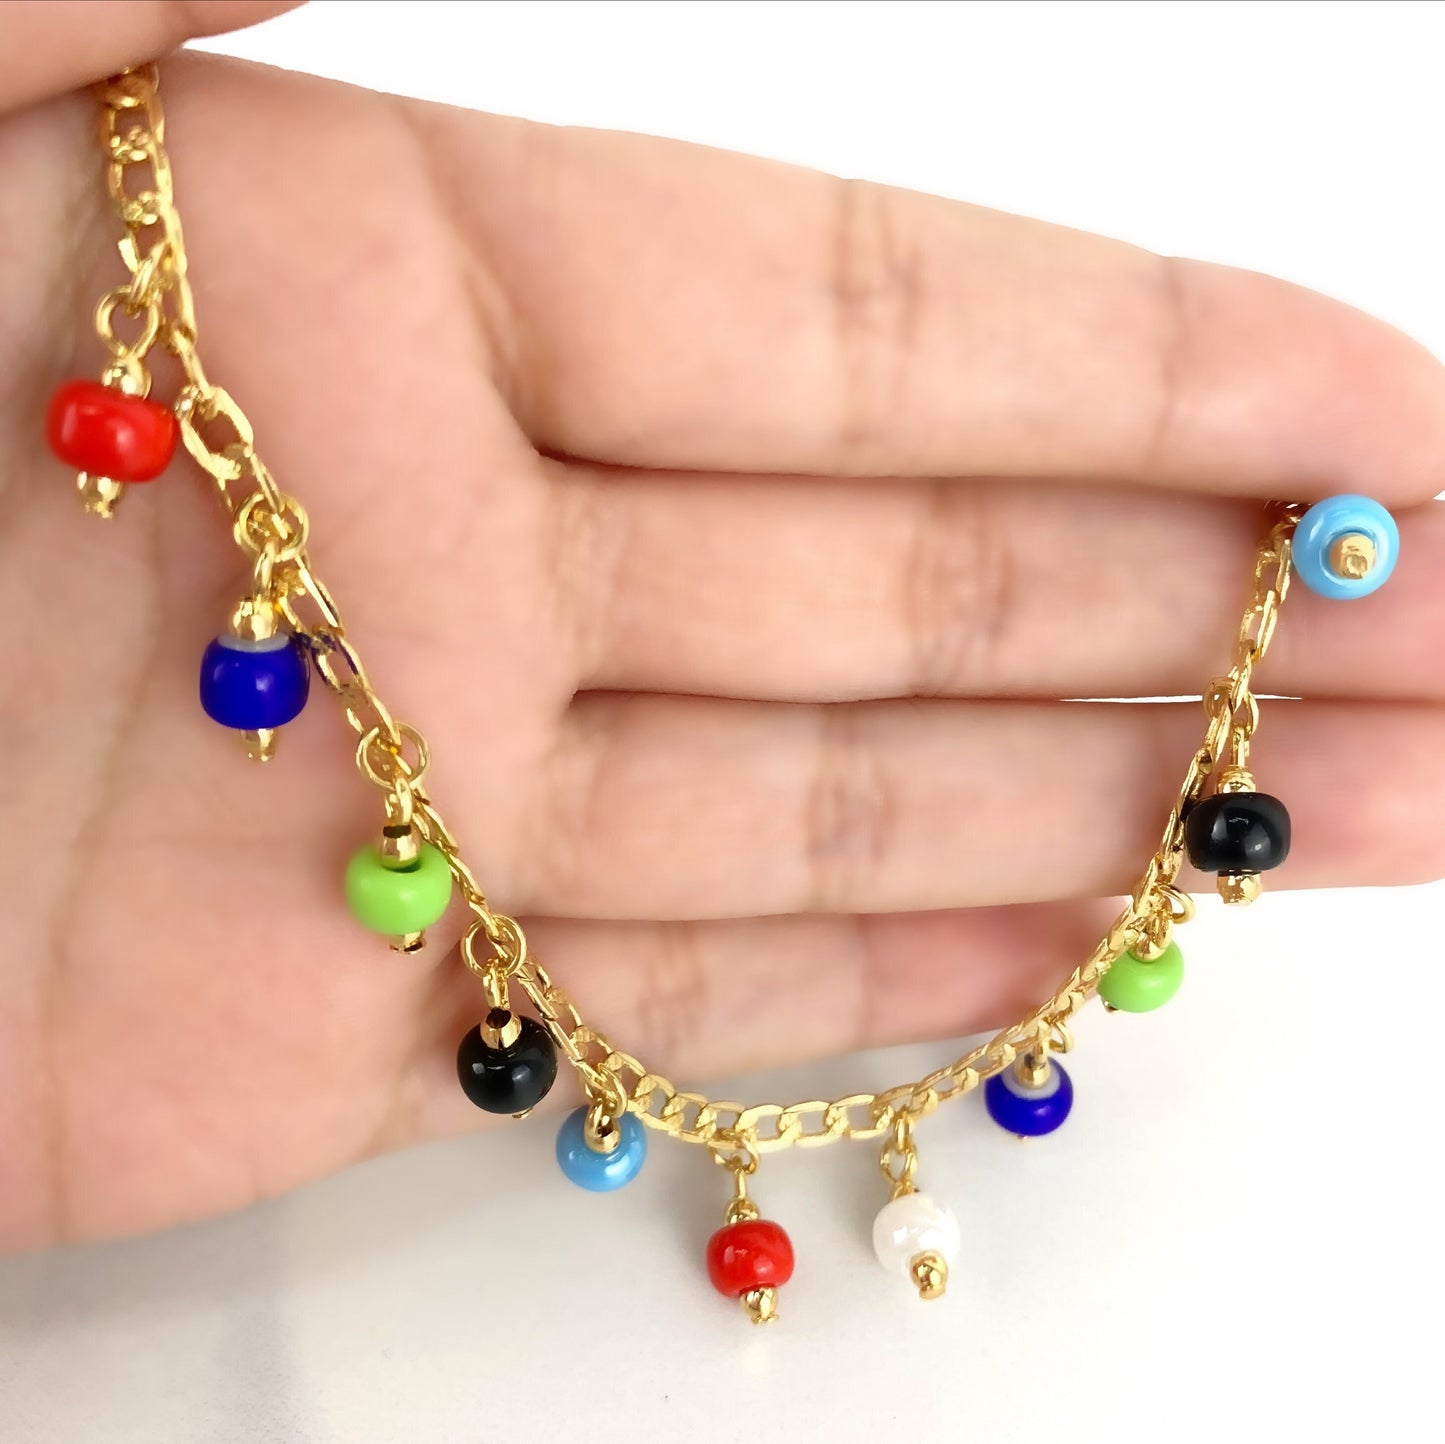 18k Gold Filled Curb Link Featuring Multicolor Beads Charms Bracelet, Cuban Link 7 Inches Bracelet, Wholesale Jewelry Supplies